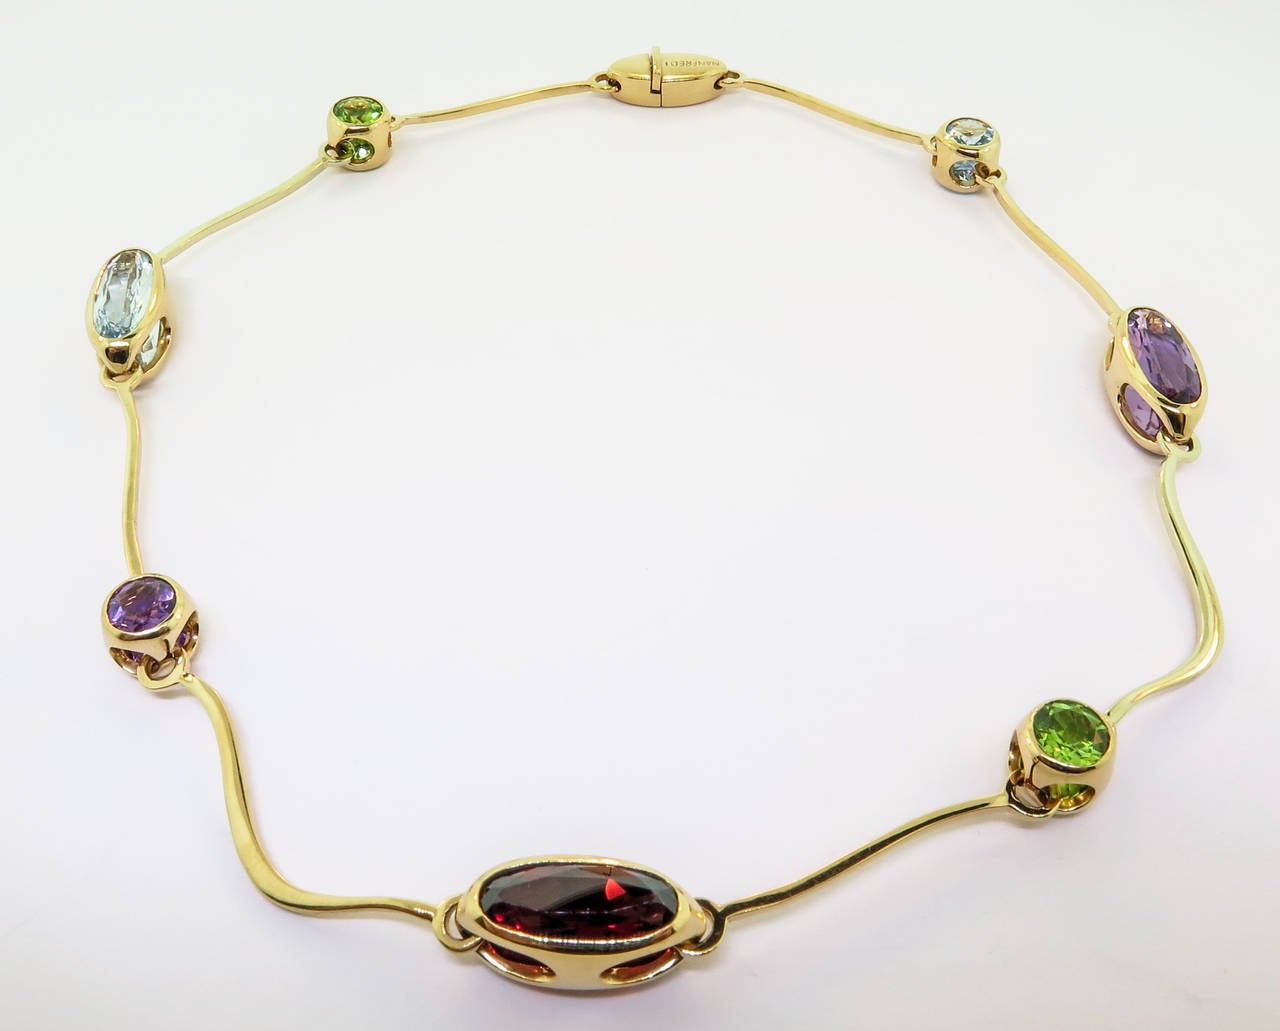 This fine necklace features garnet, amethyst and peridot finely handcrafted in 18k yellow gold by the Italian jewelry designer Manfredi.